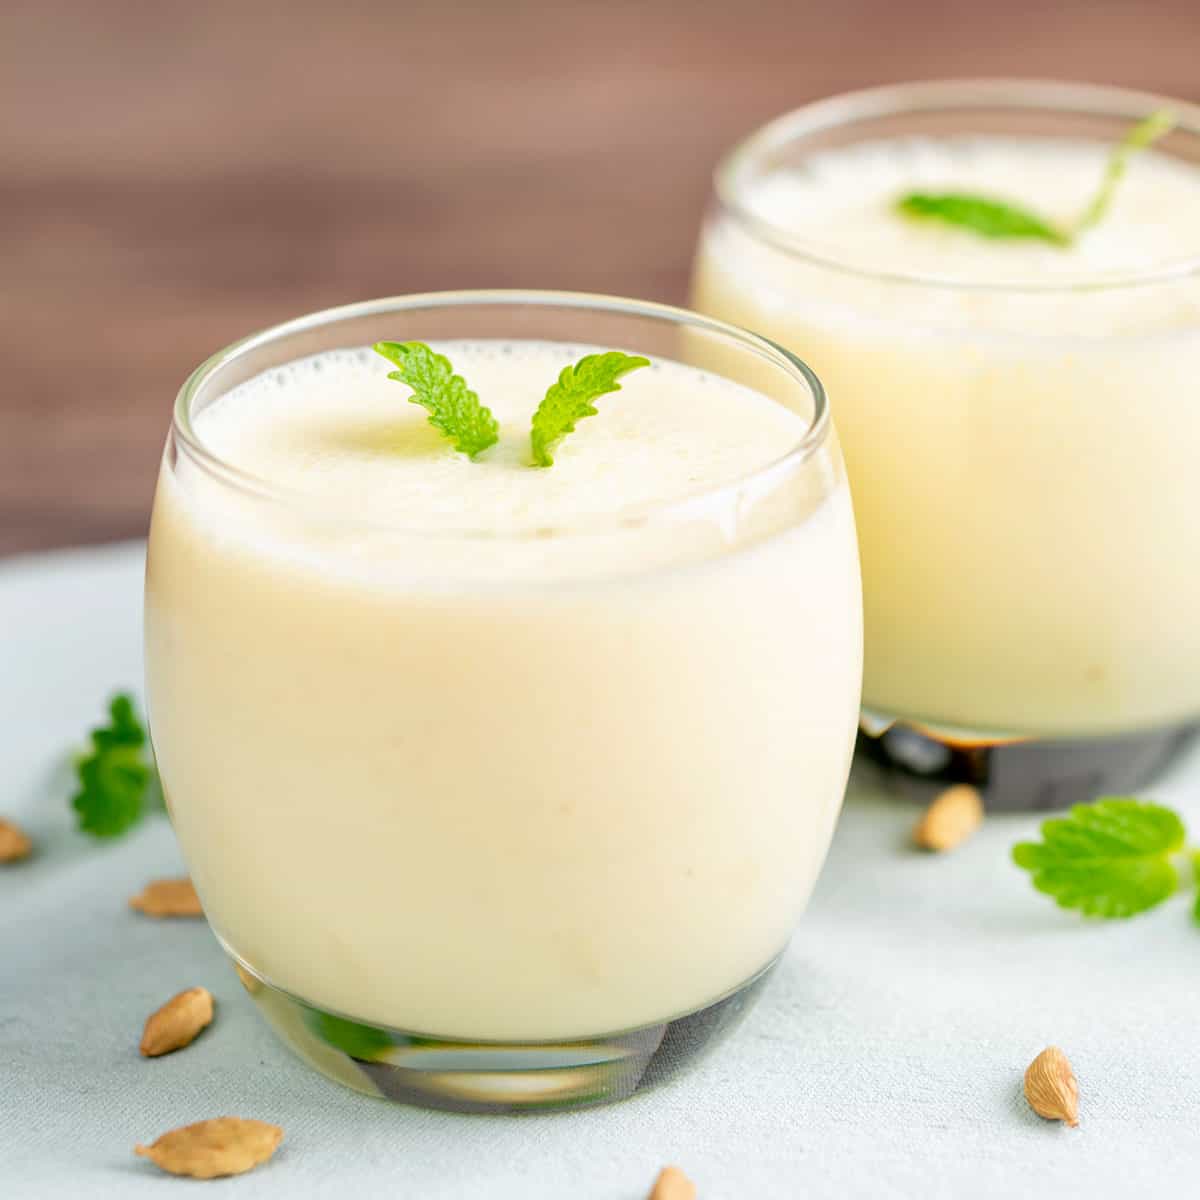 Easy and Authentic Indian Lassi Recipe (You'll LOVE the Mango Lassi)